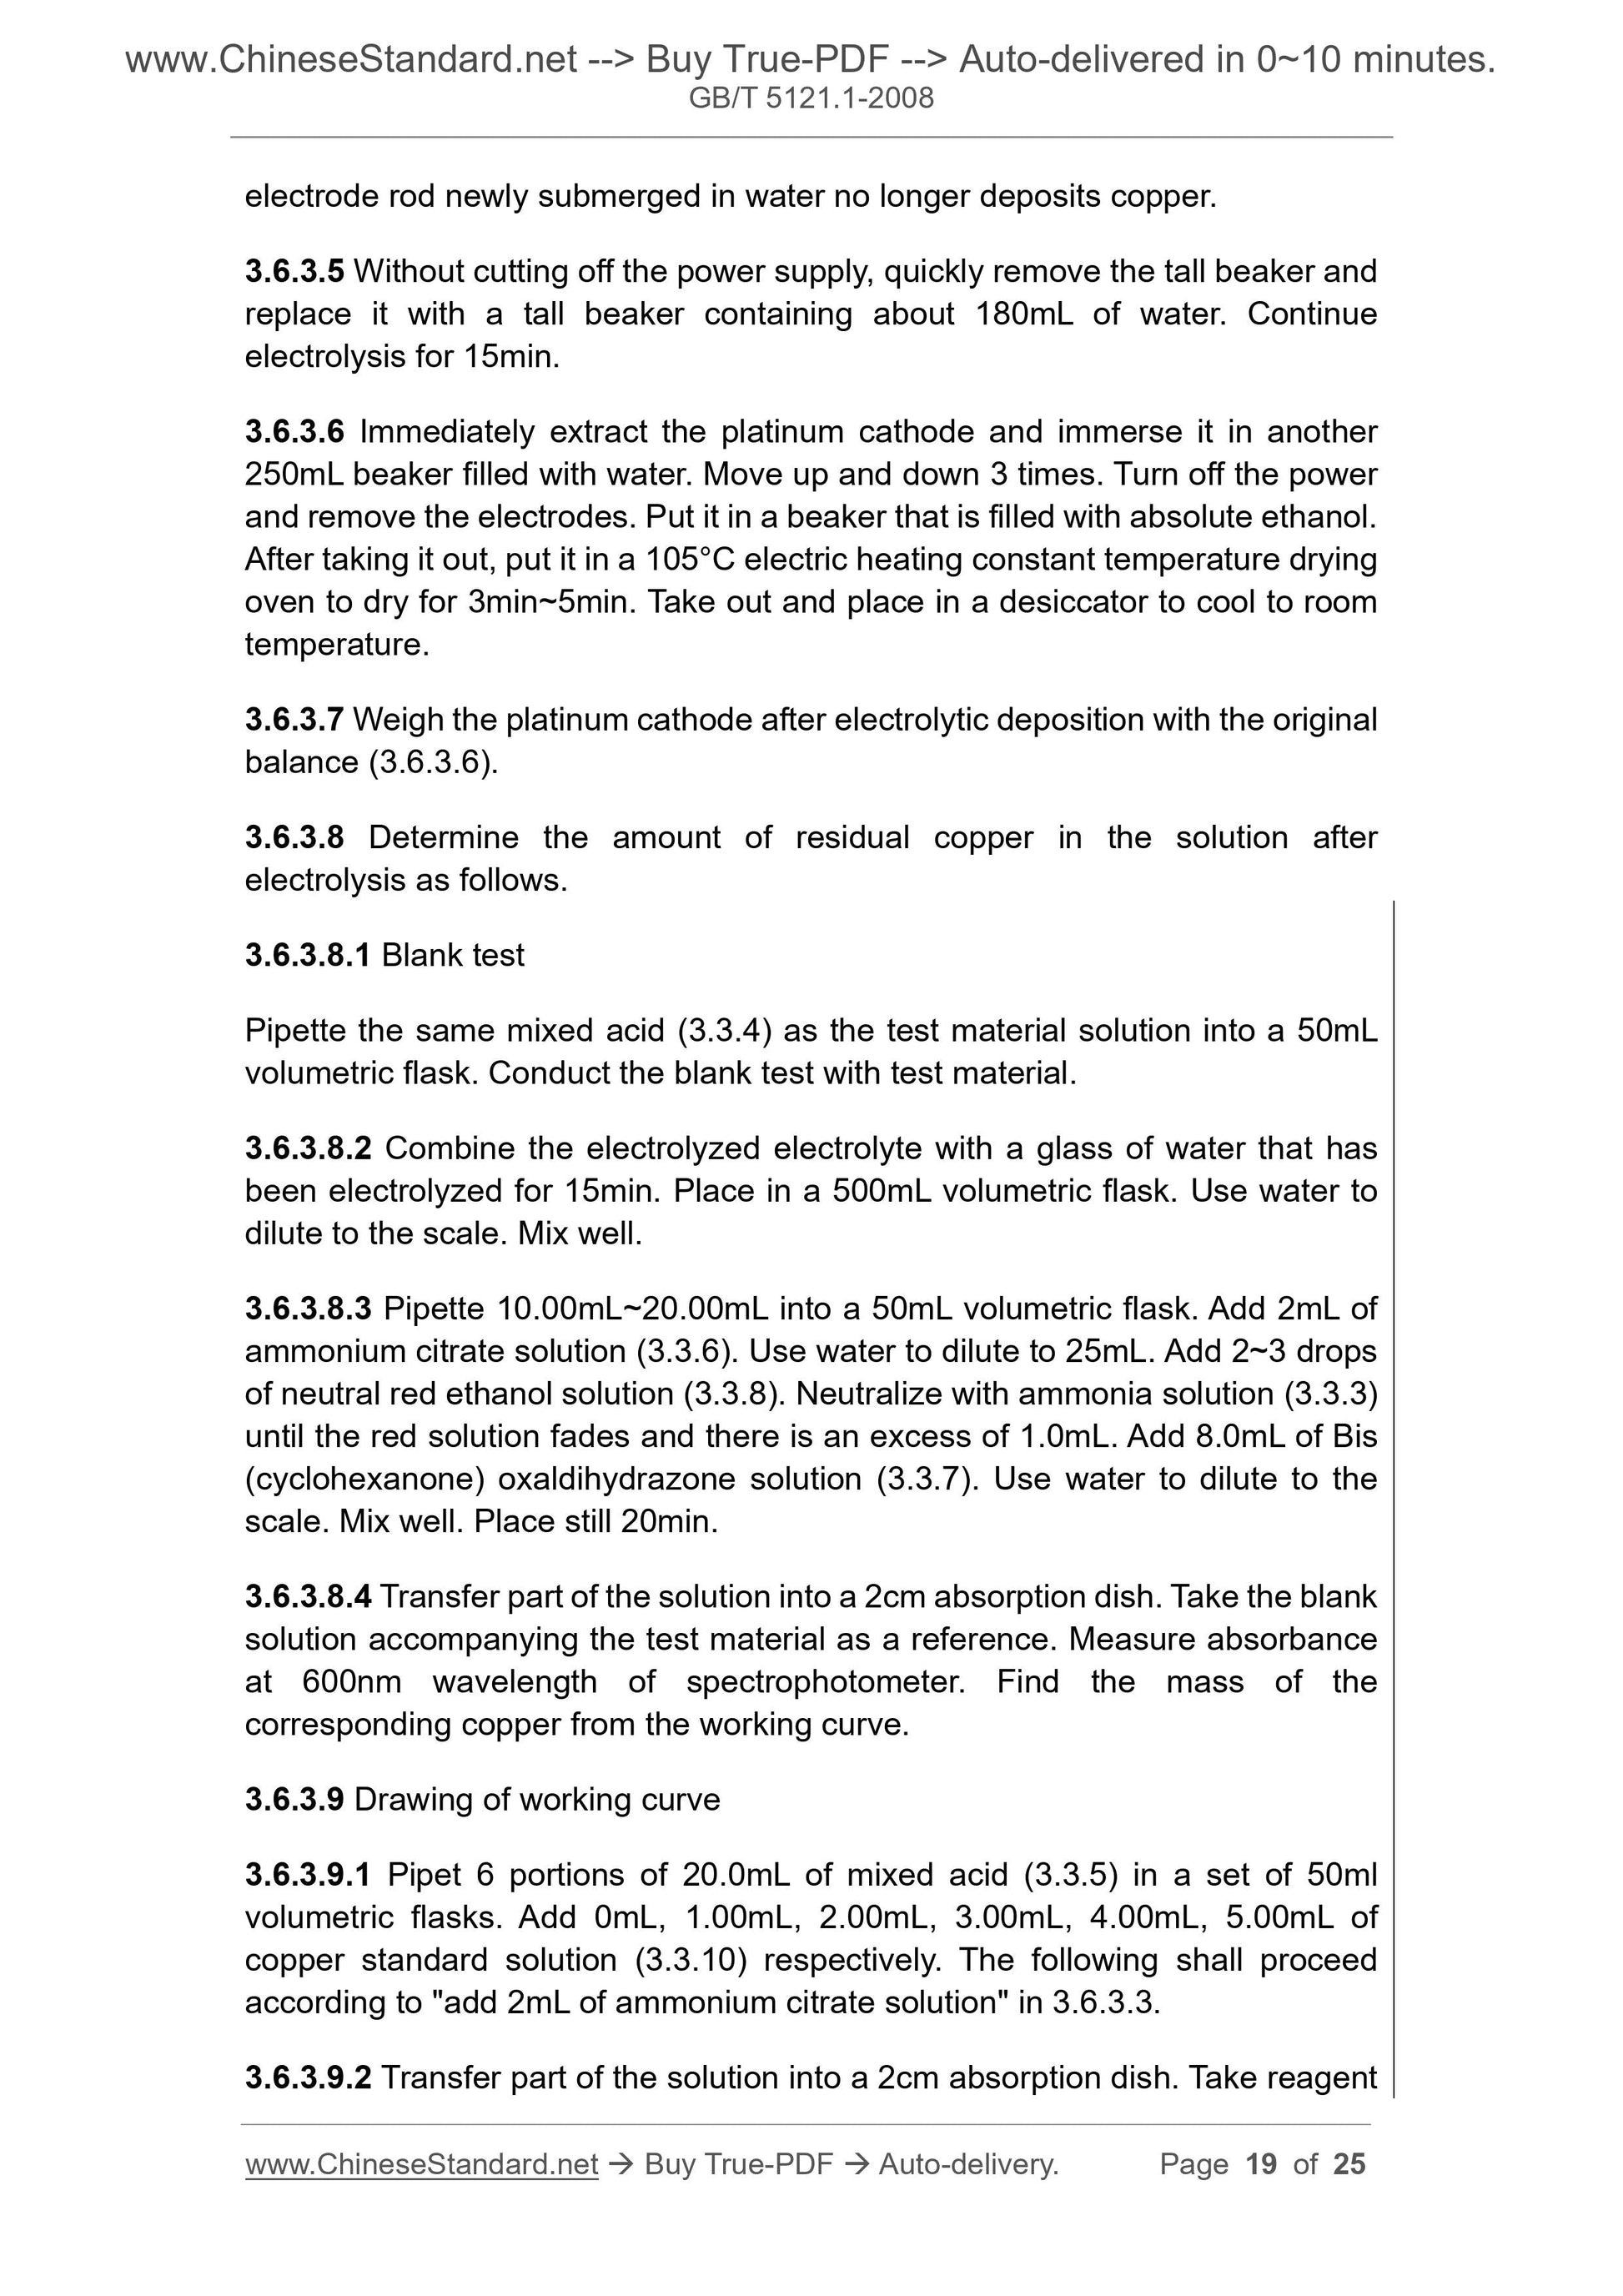 GB/T 5121.1-2008 Page 8